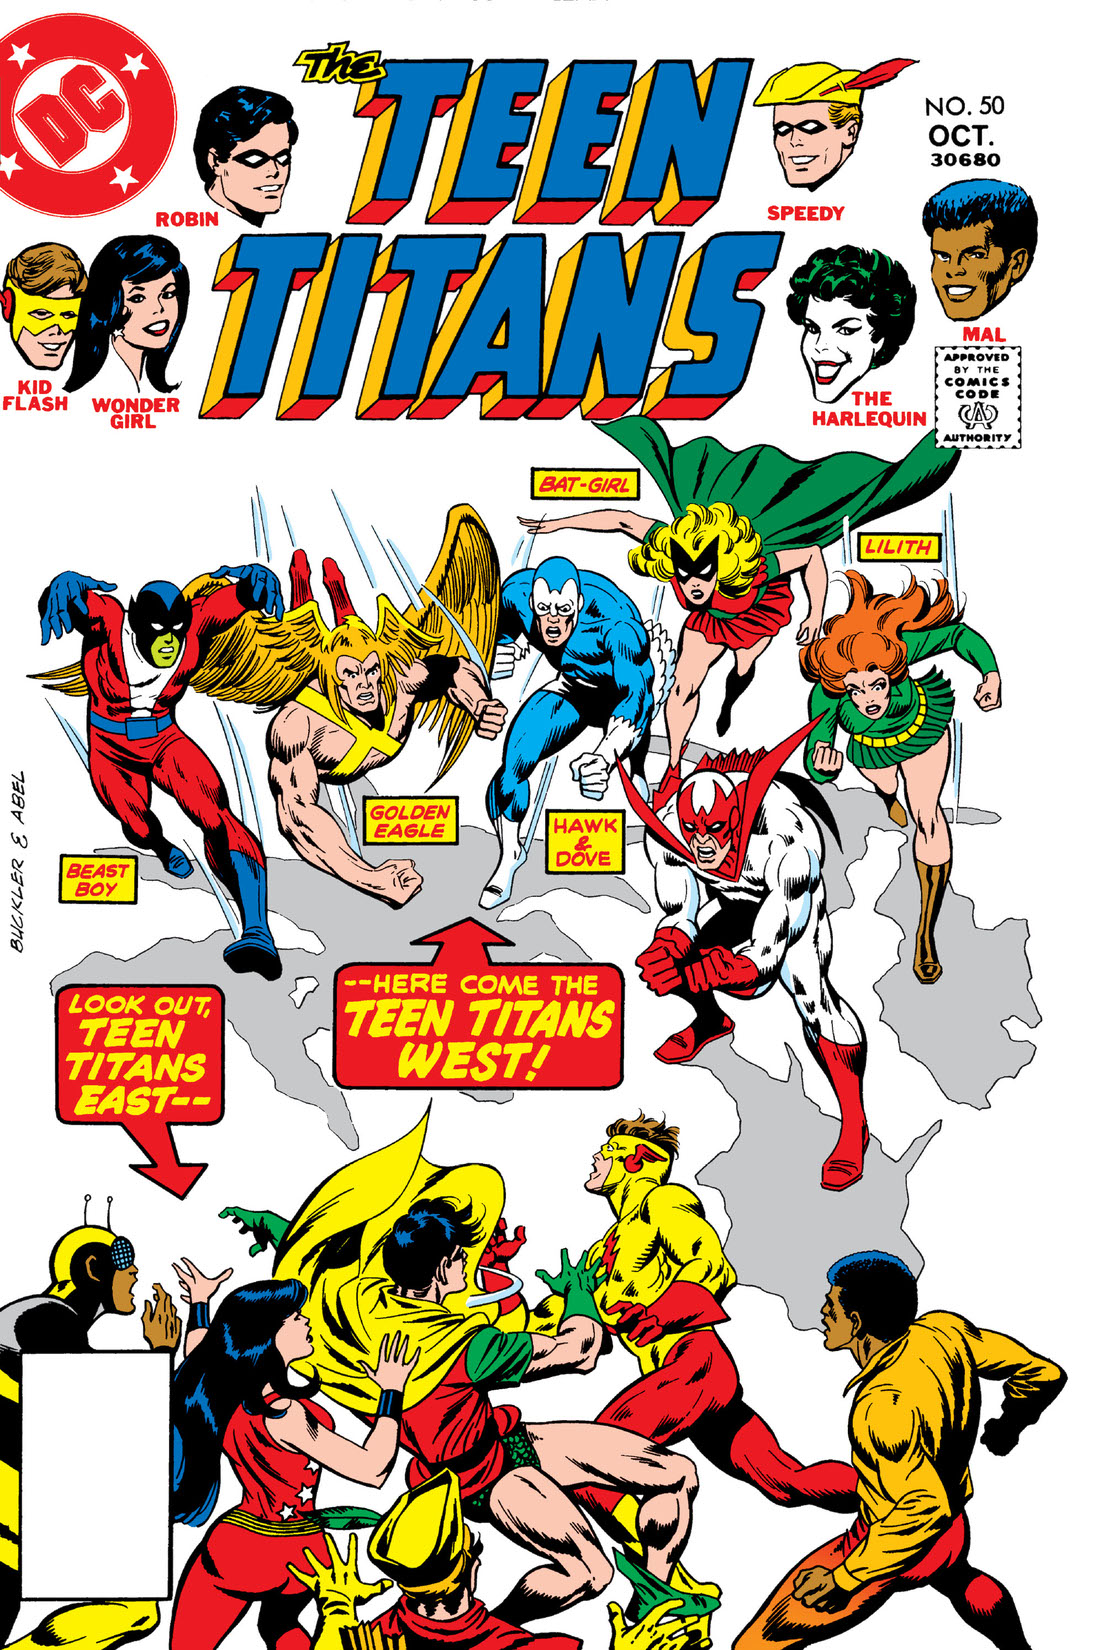 Teen Titans (1966-) #50 preview images